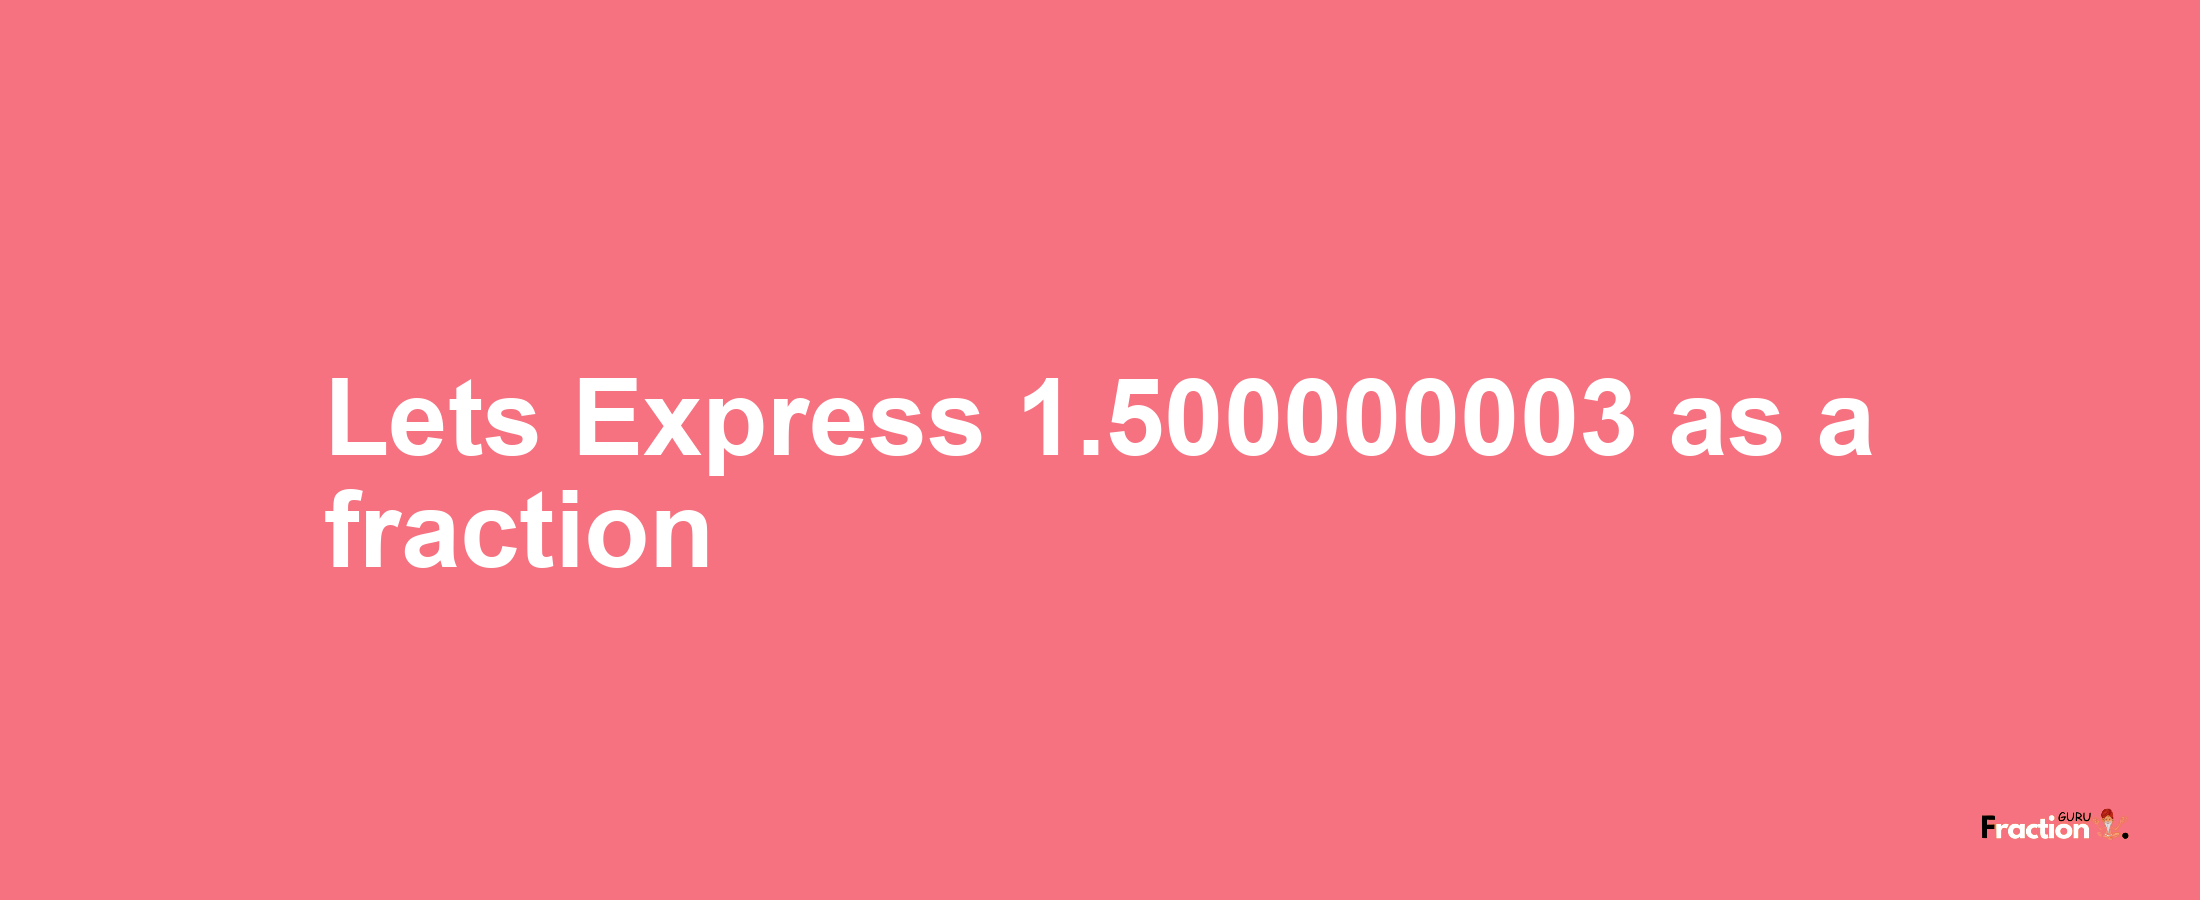 Lets Express 1.500000003 as afraction